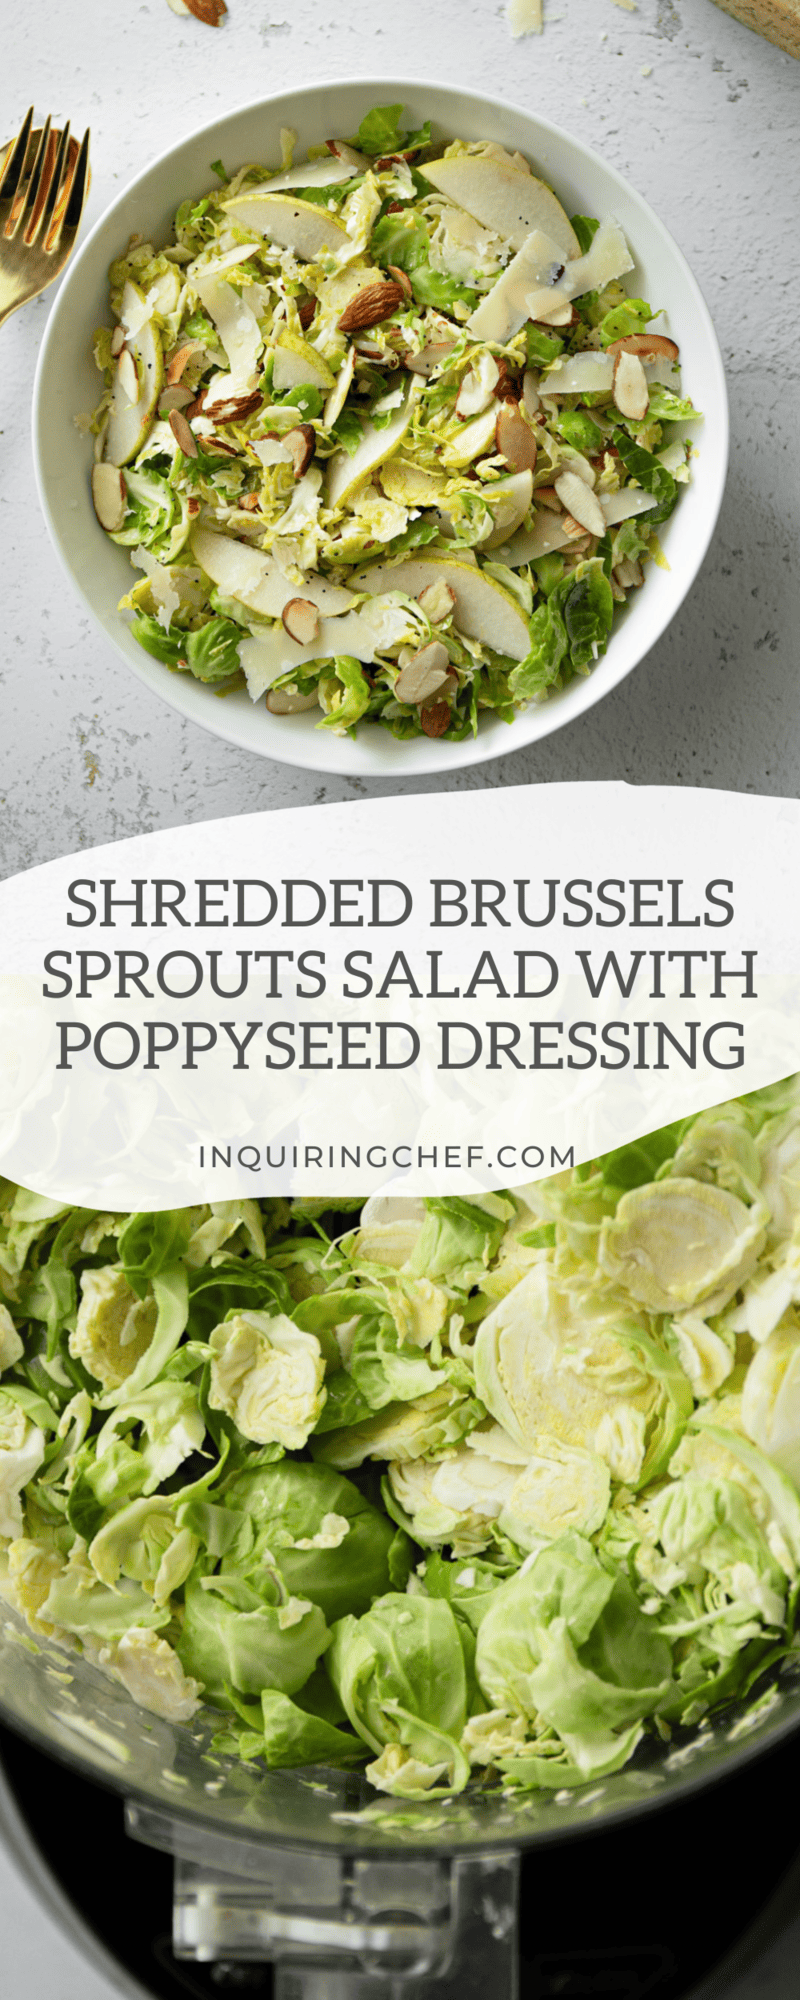 shredded brussels sprouts salad